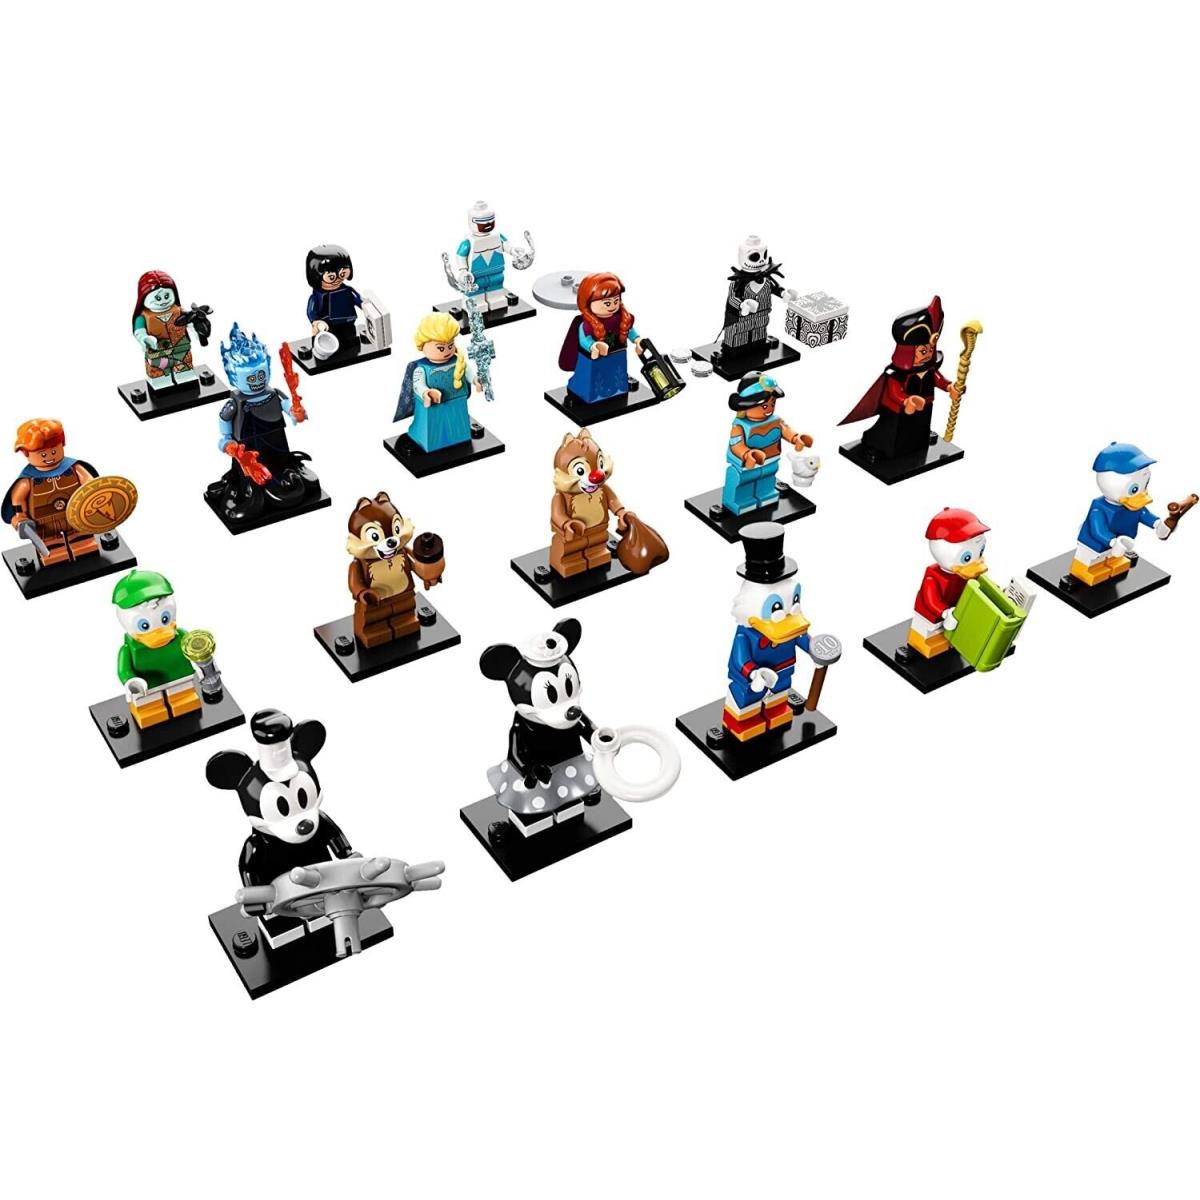 Lego Disney Series 2 Collectible Minifigure Series - Complete Set of 18 71024